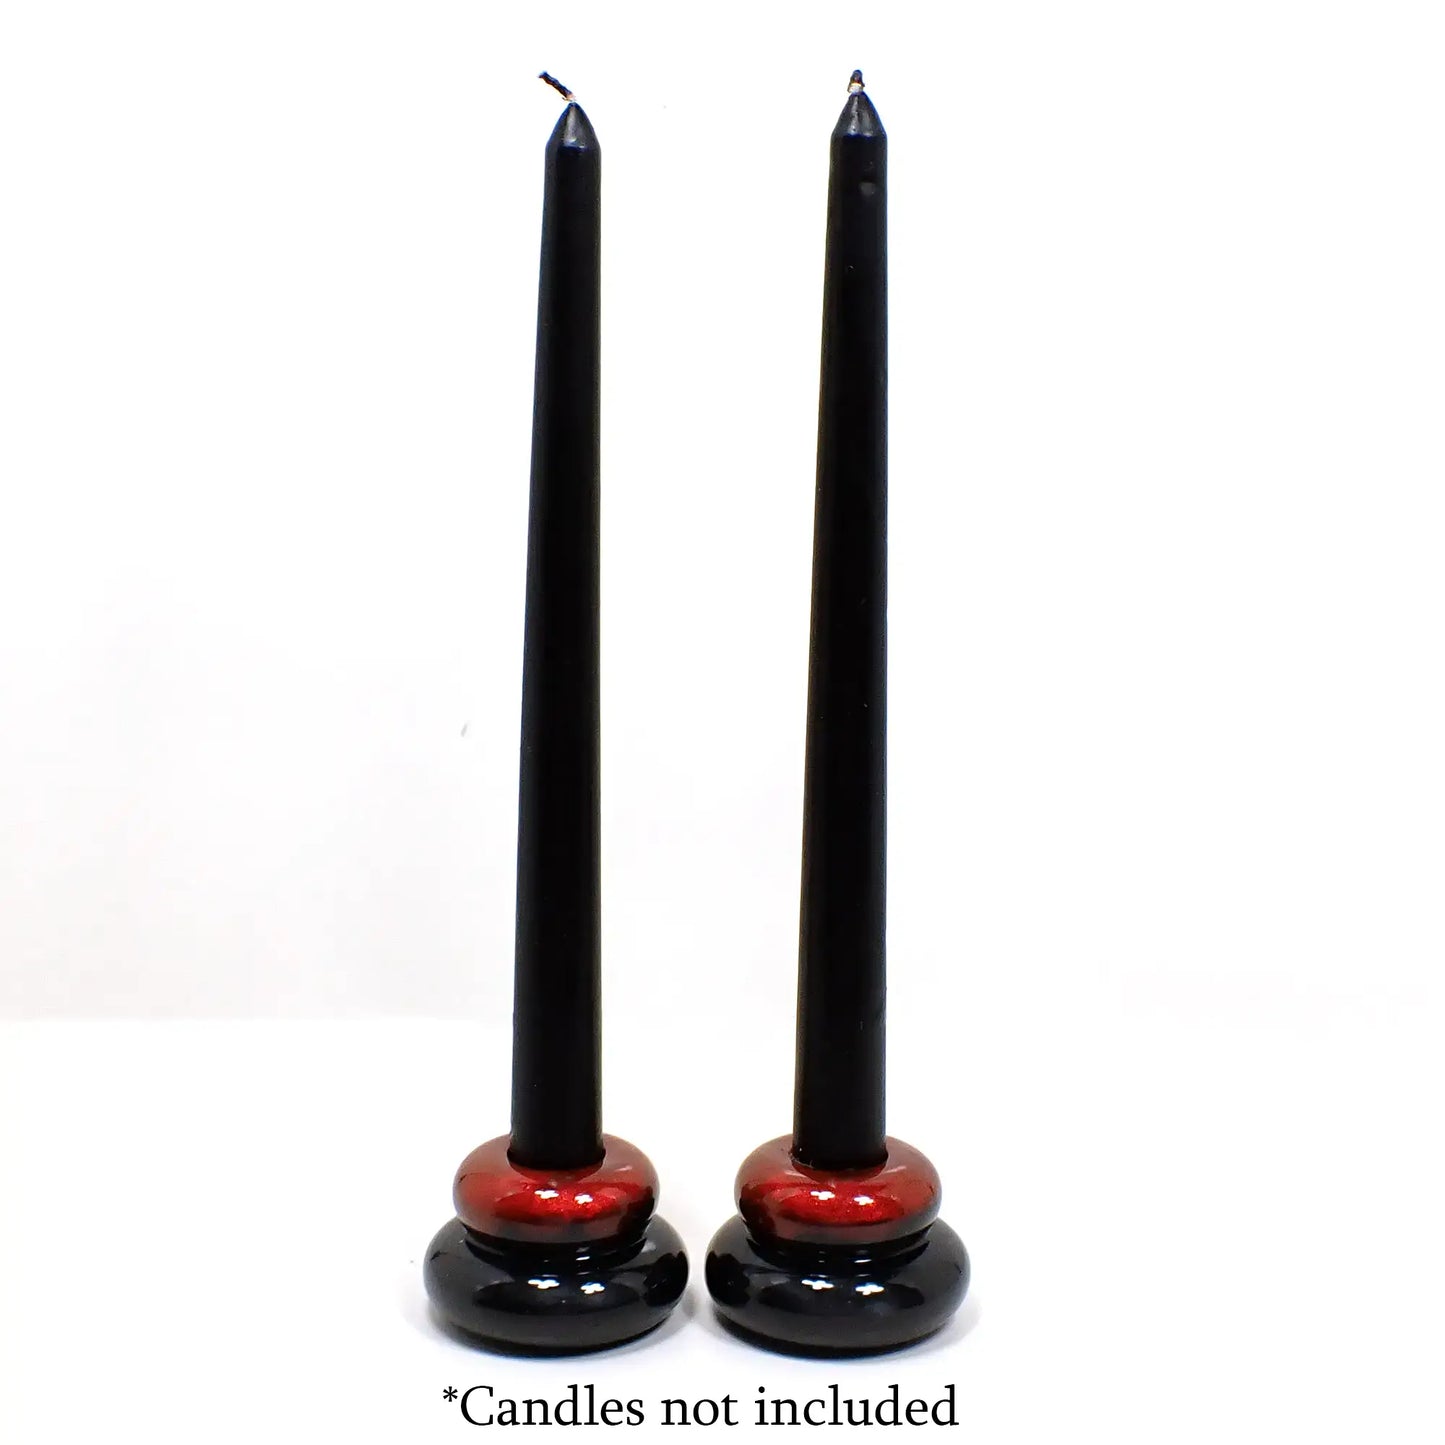 Set of Two Pearly Red and Black Resin Handmade Puffy Round Double Ring Candlestick Holders, Goth Vampire Halloween Decor